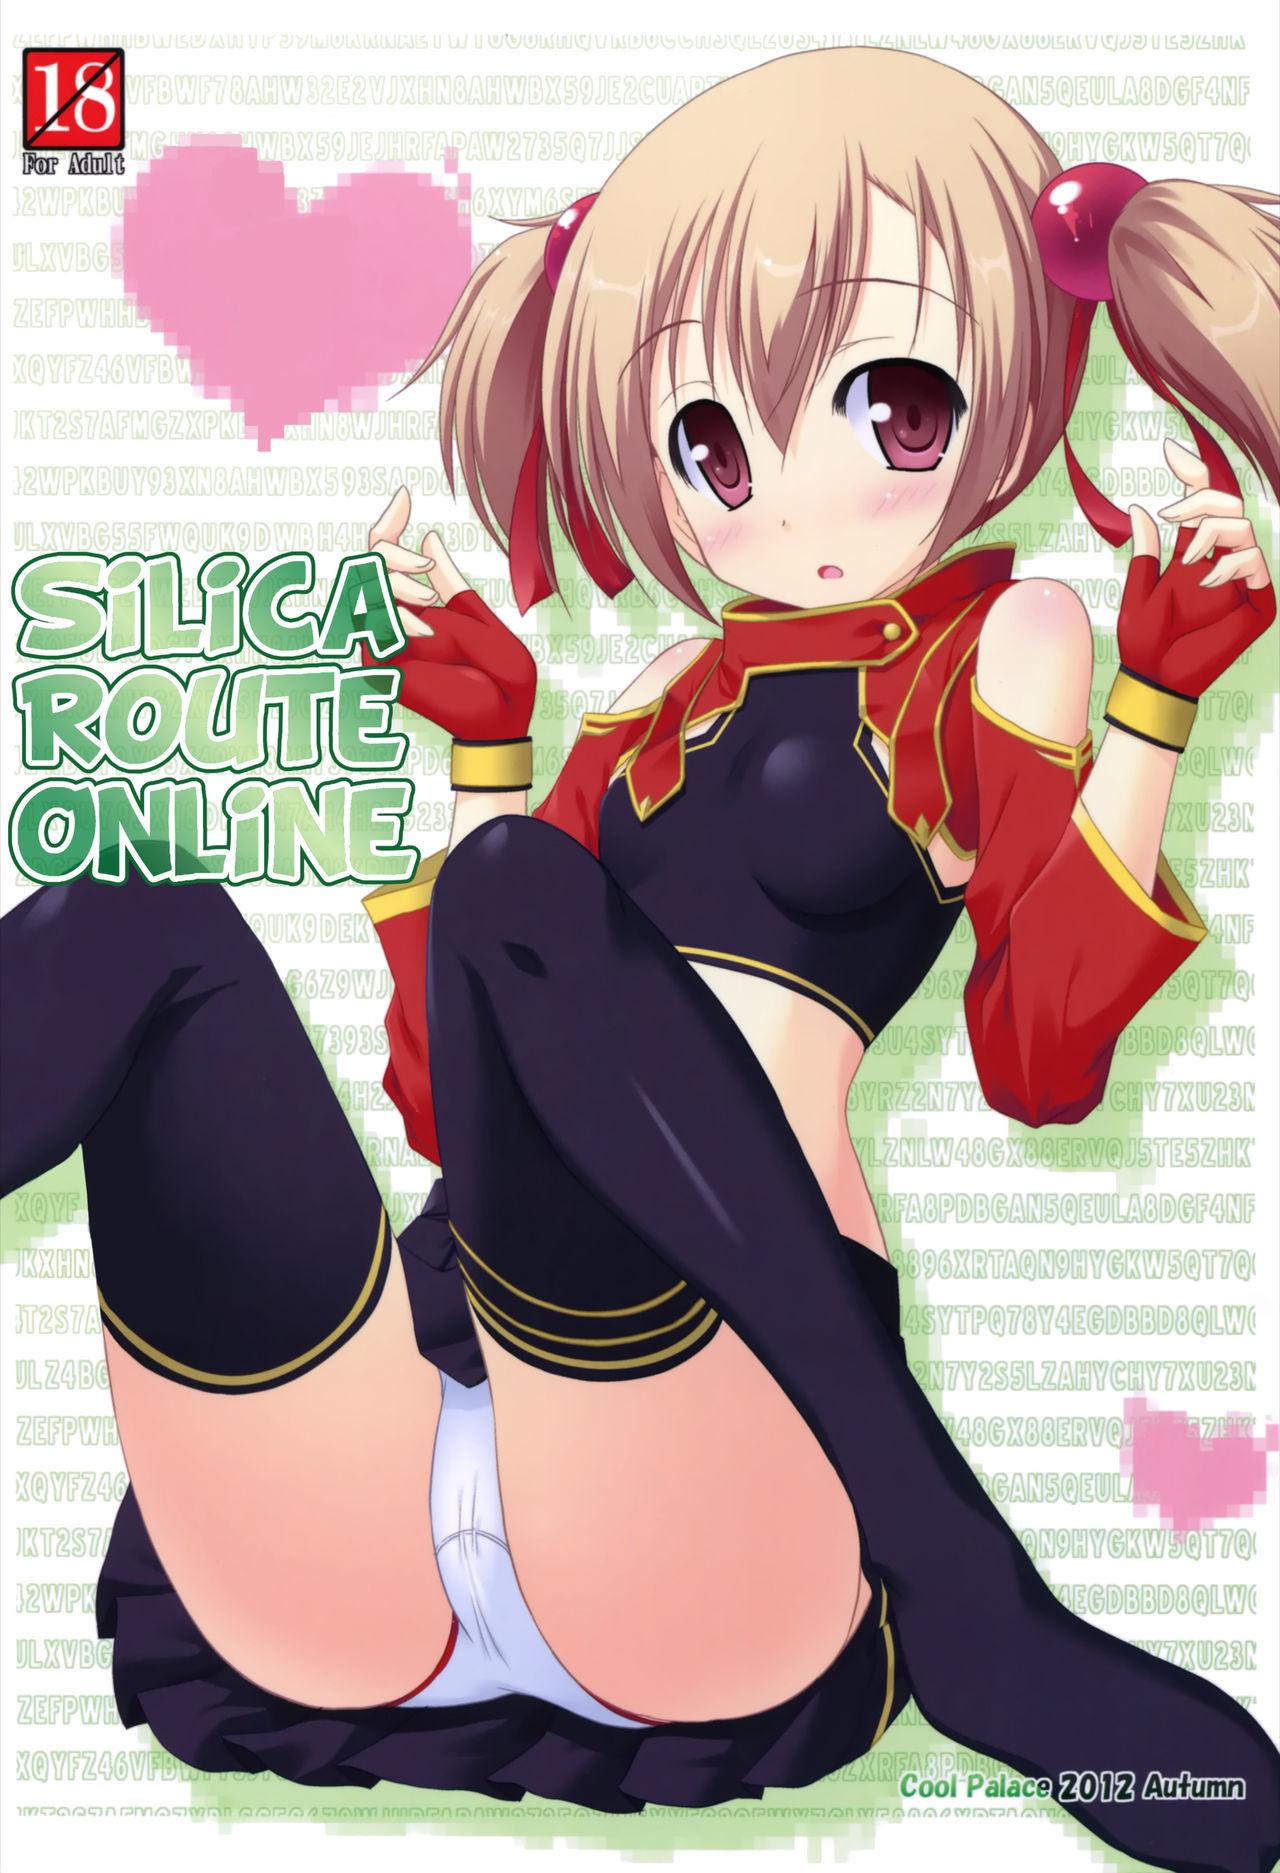 Home Silica Route Online - Sword art online Forwomen - Page 1